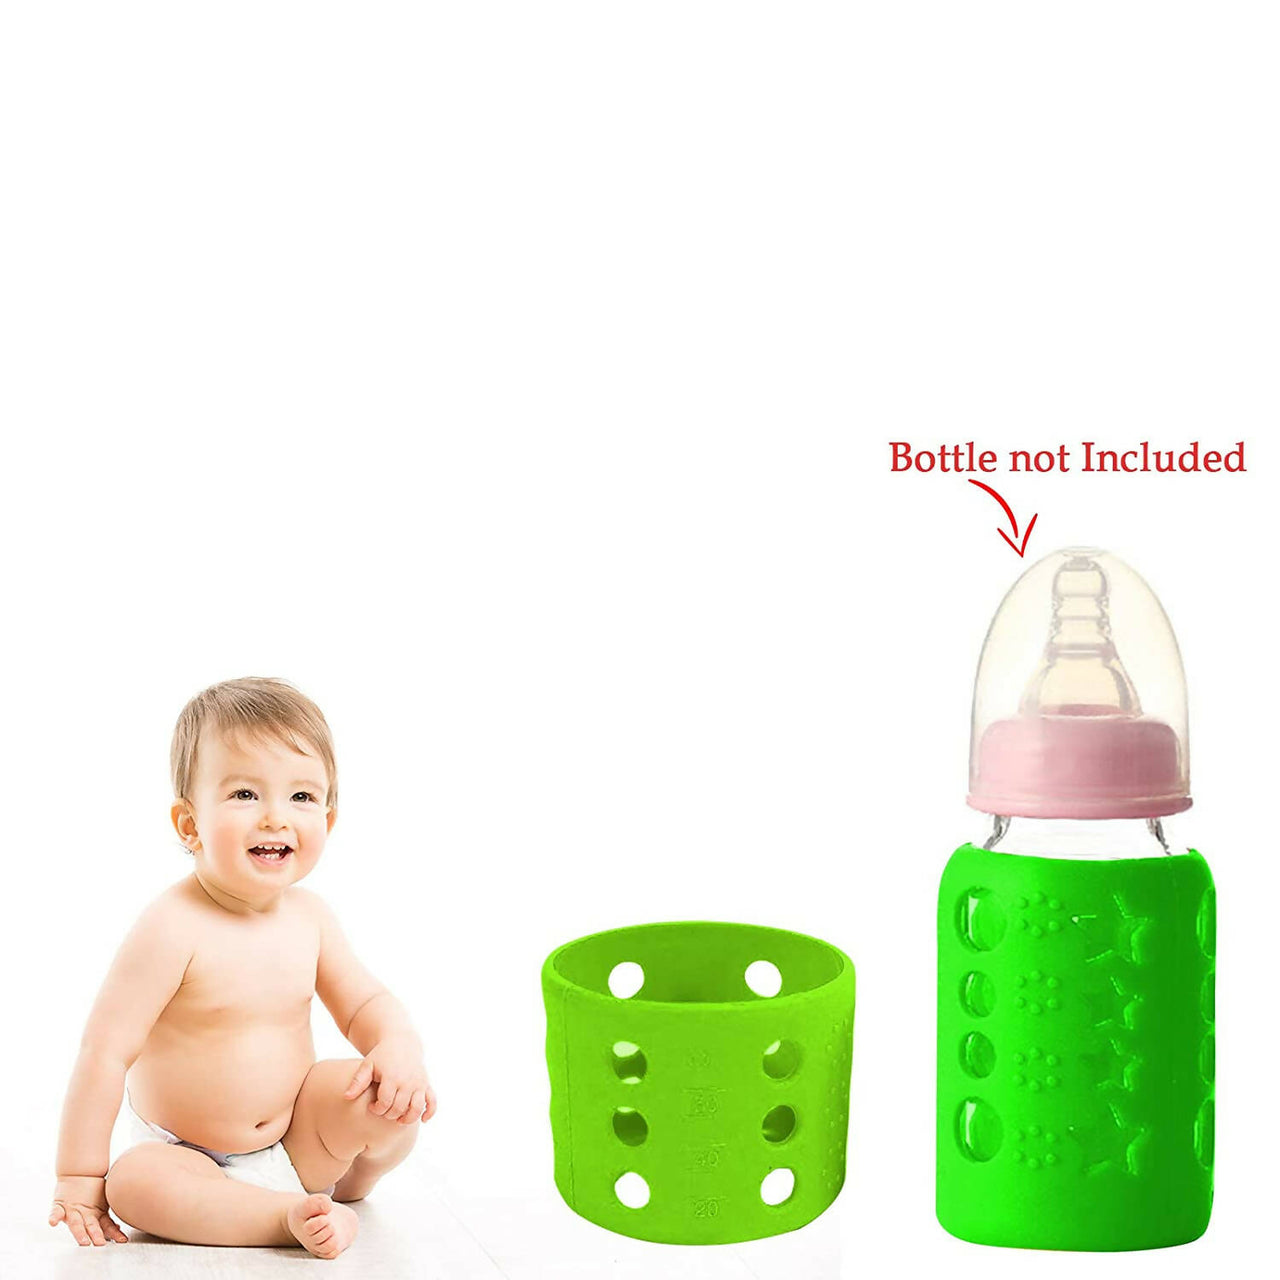 Safe-O-Kid Silicone Baby Feeding Bottle Cover Cum Sleeve for Insulated Protection Small 60mL- Green - Distacart